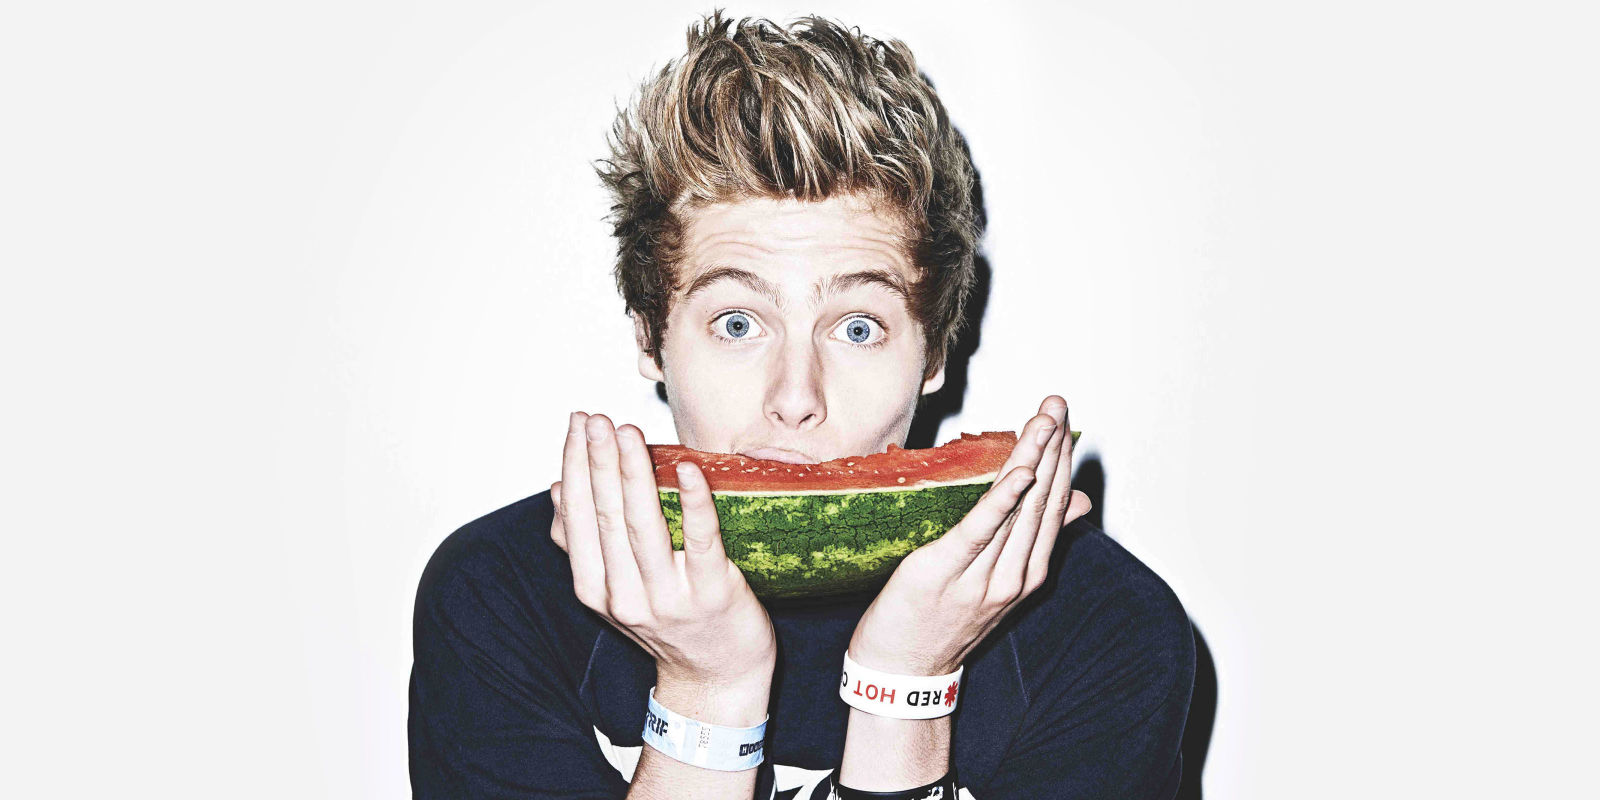 5sos S Luke Hemmings Here His Hottest Photos Of All